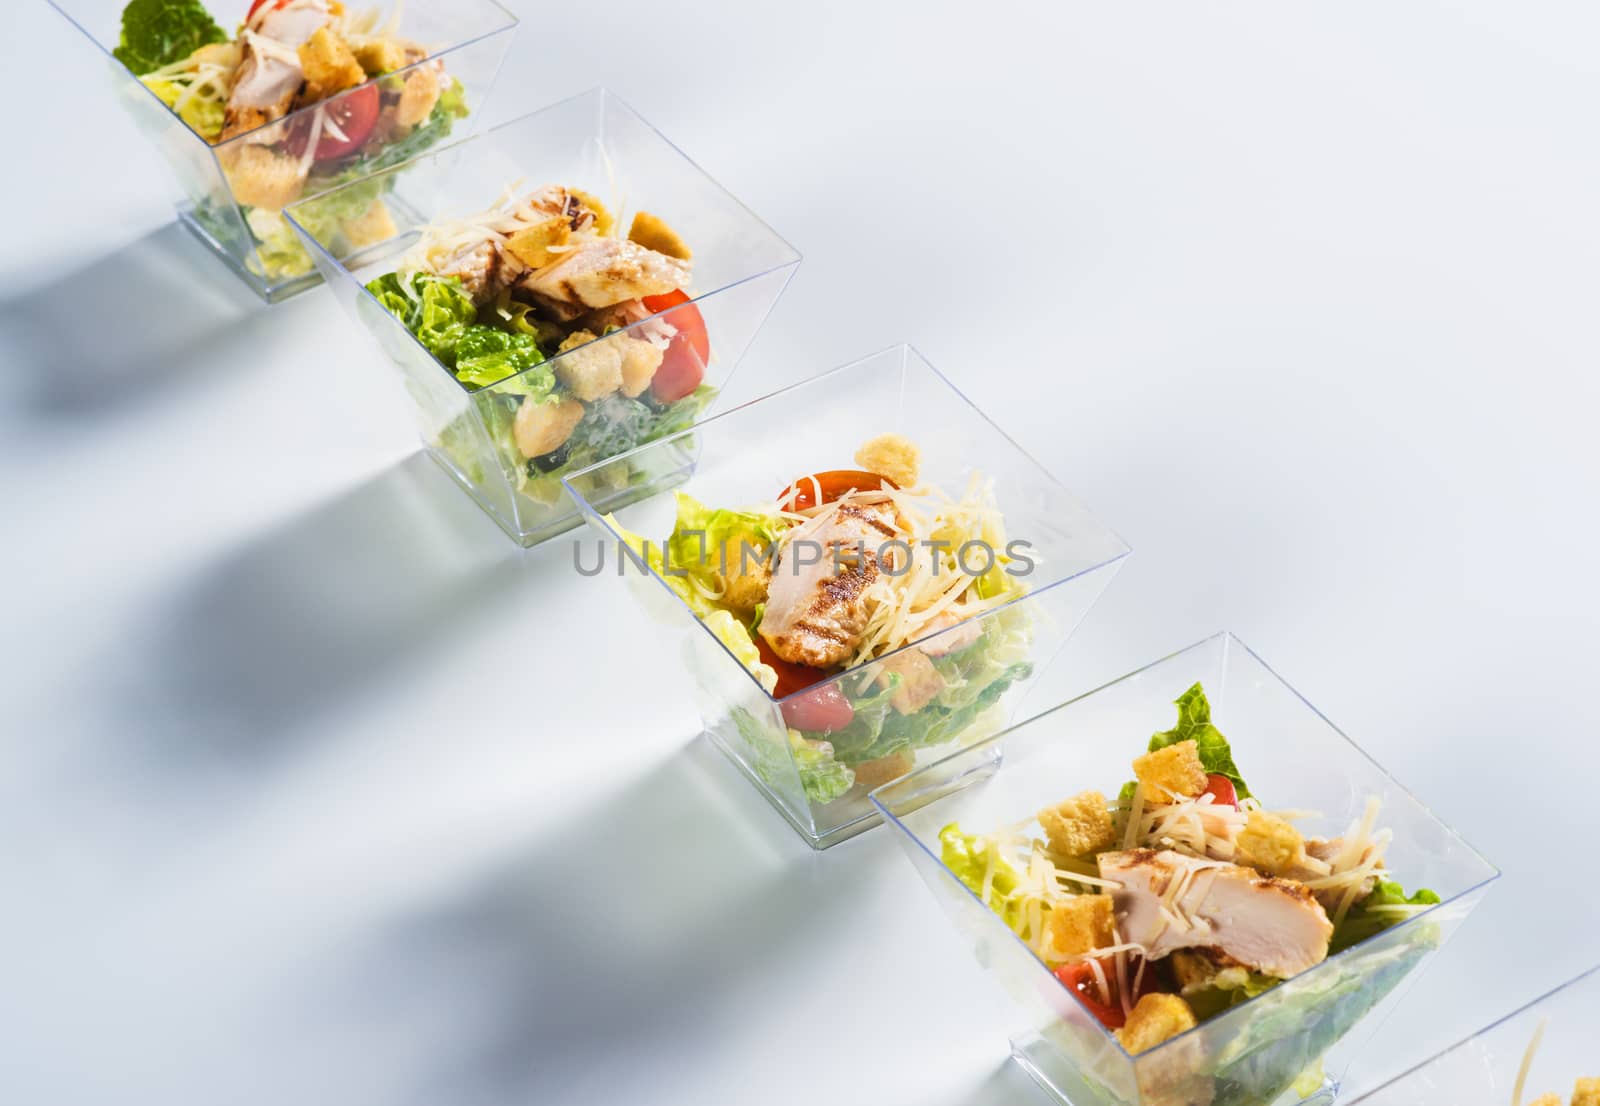 Salad with chicken and crackers in glass by kzen